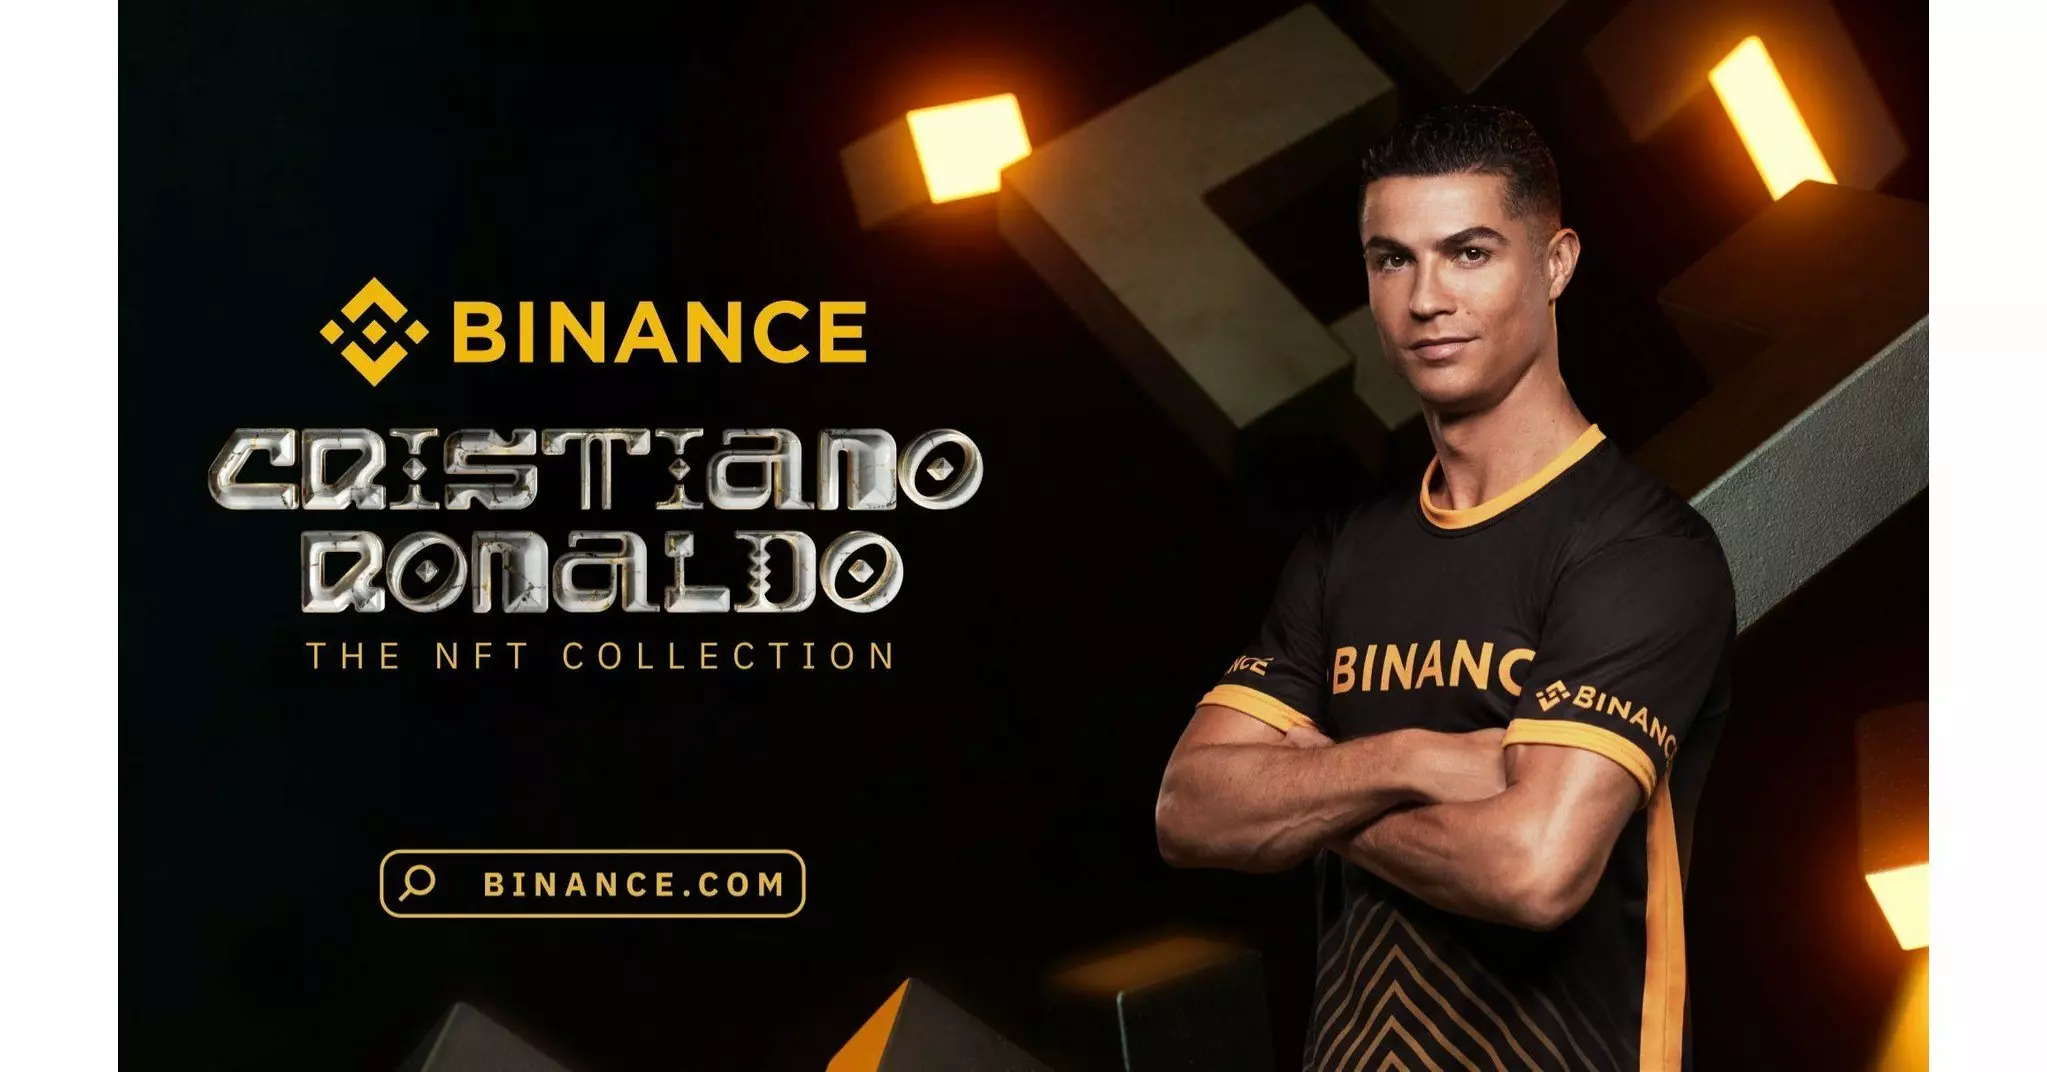 Ronaldo's first NFT collection was a huge success